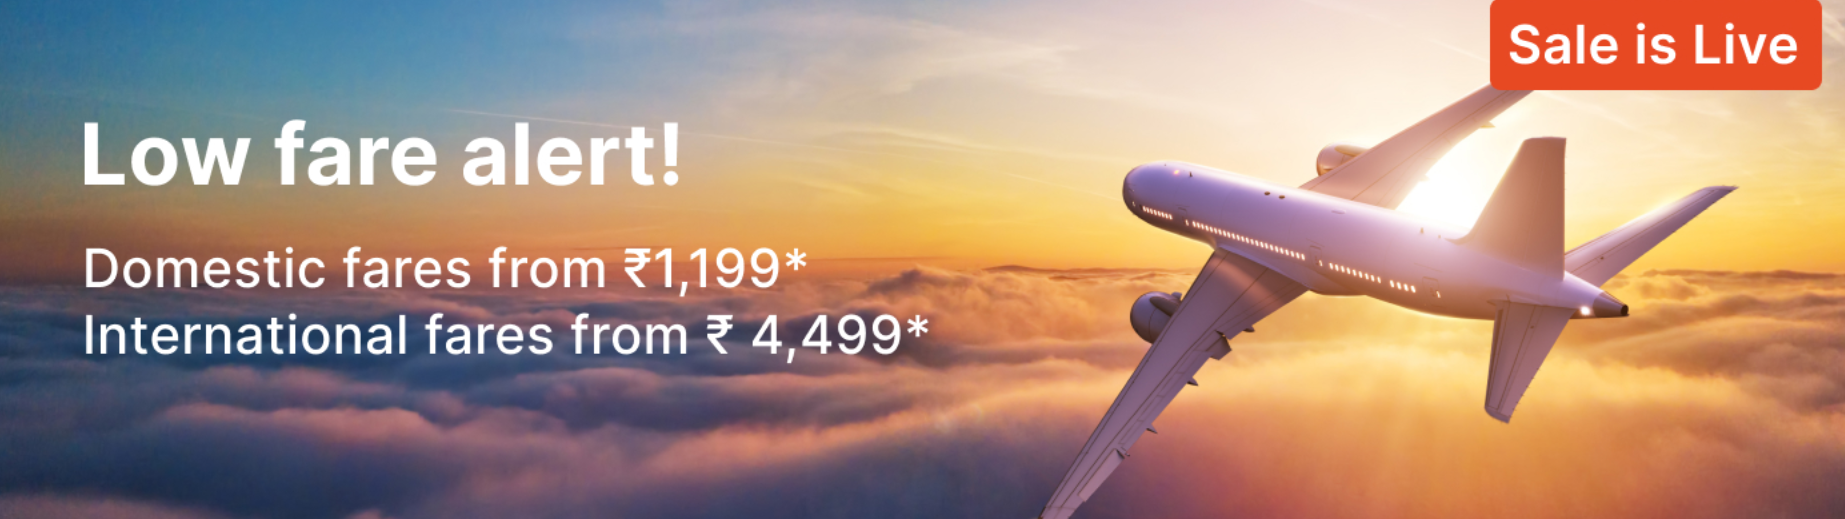 Cleartrip - Cleartrip Flights : Get Upto 70% OFF